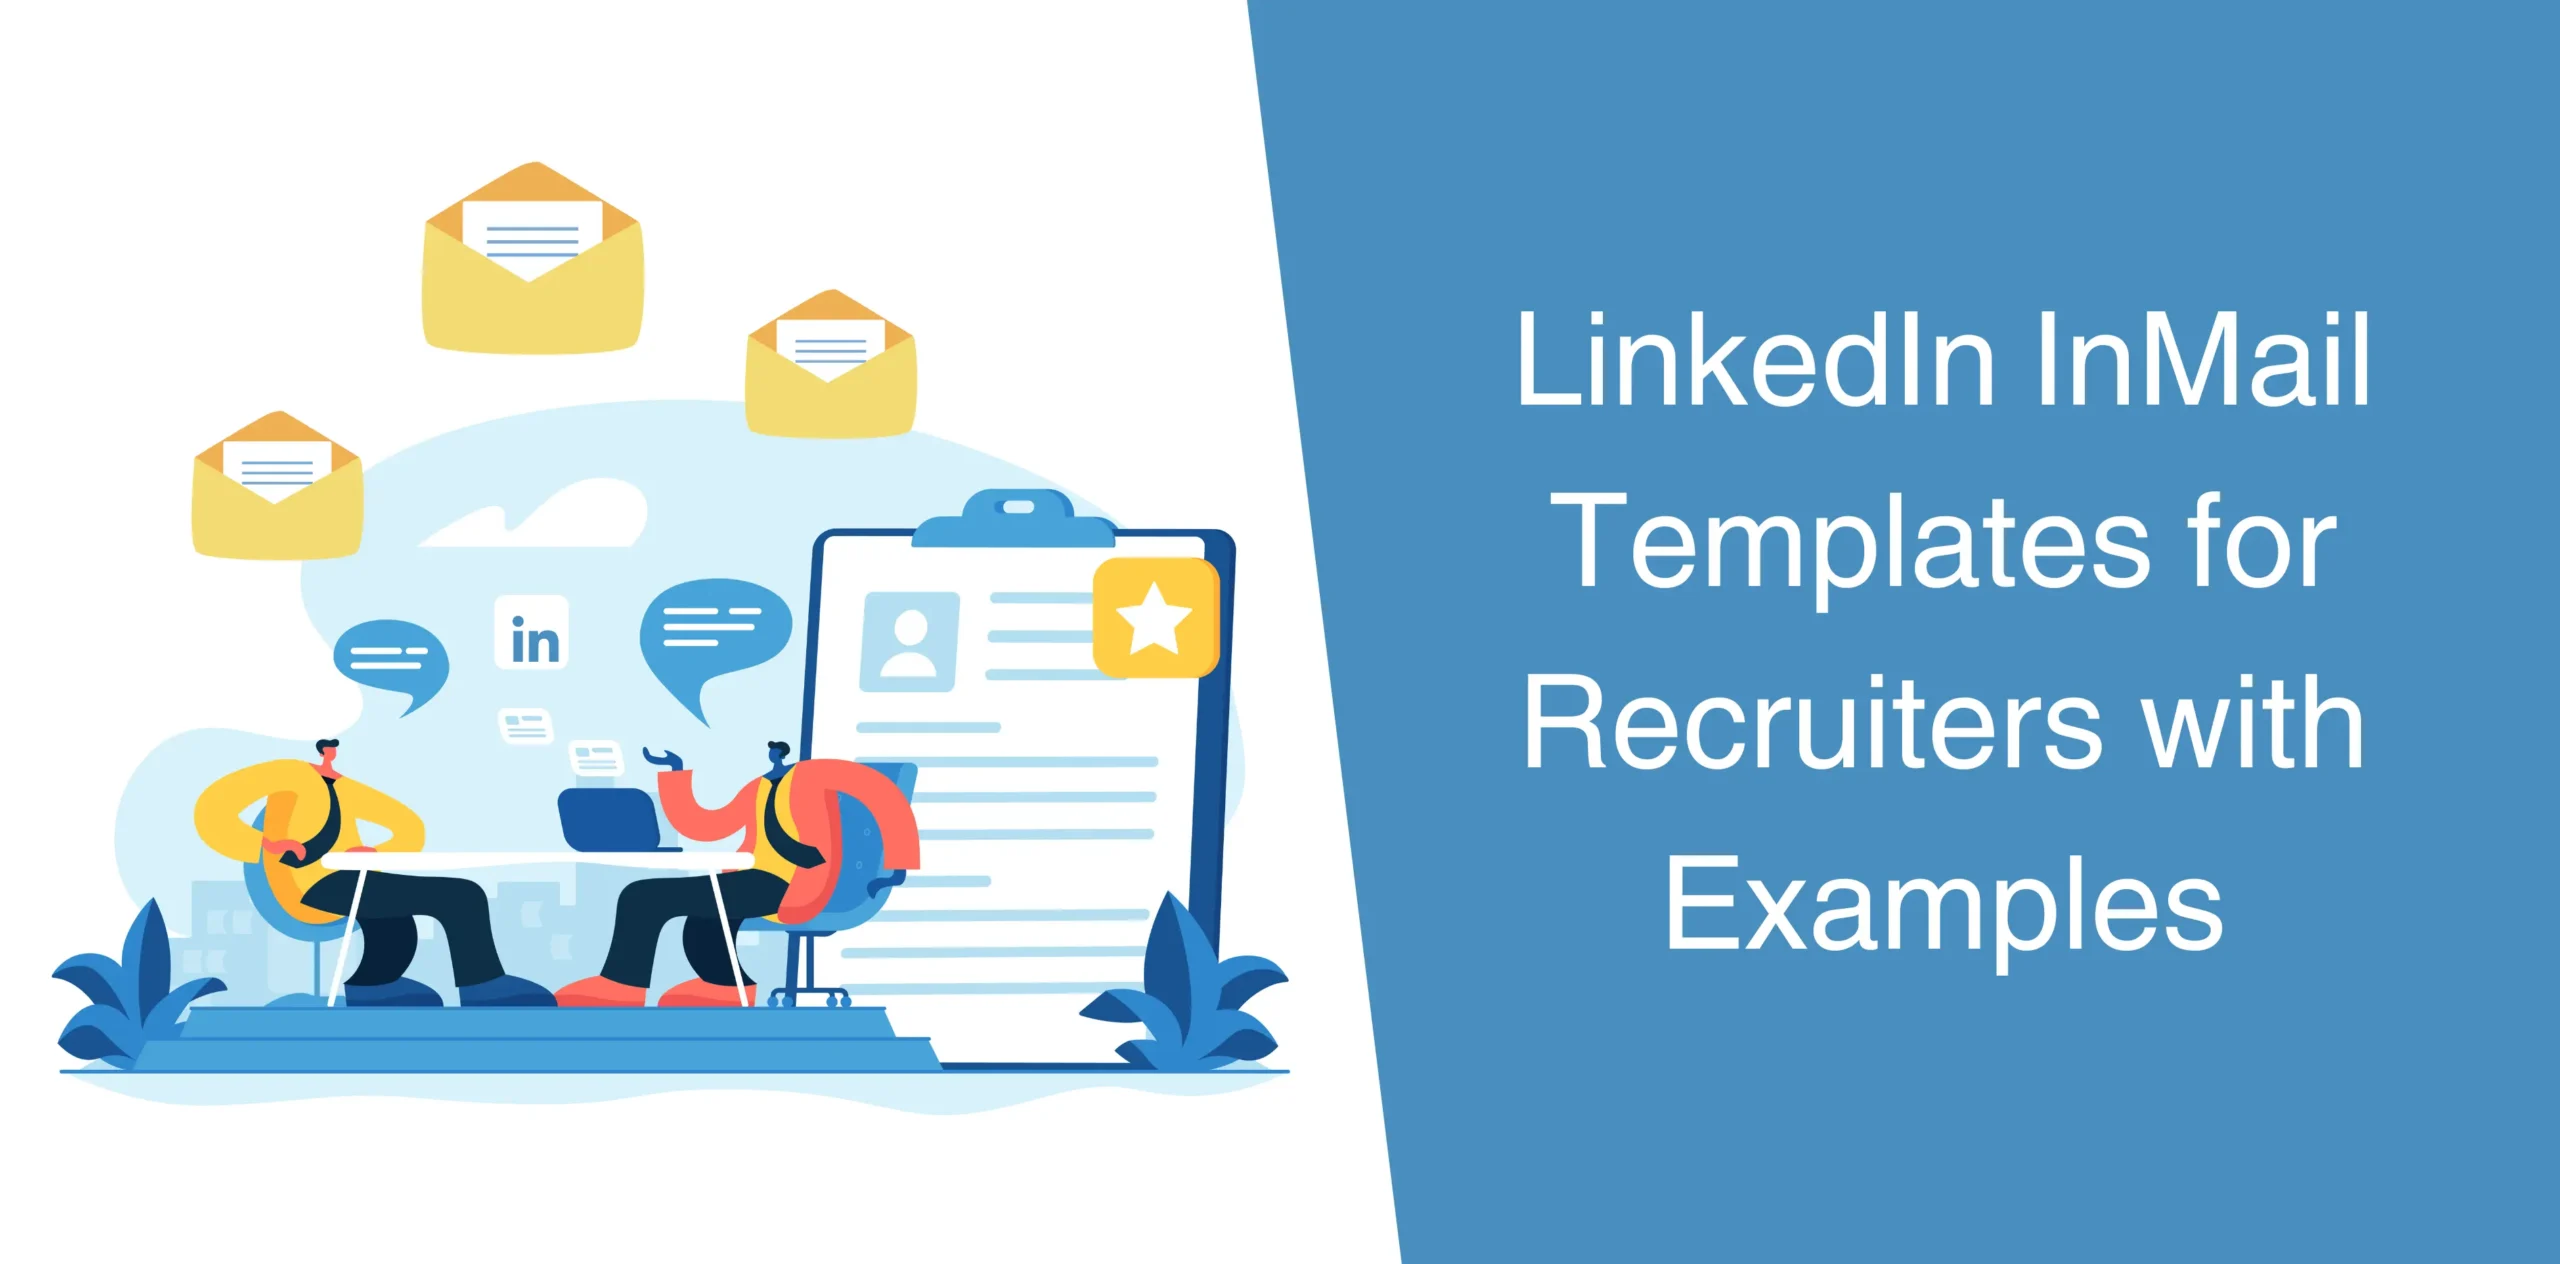 Thumbnail-LinkedIn-InMail-Templates-for-Recruiters-with-Examples